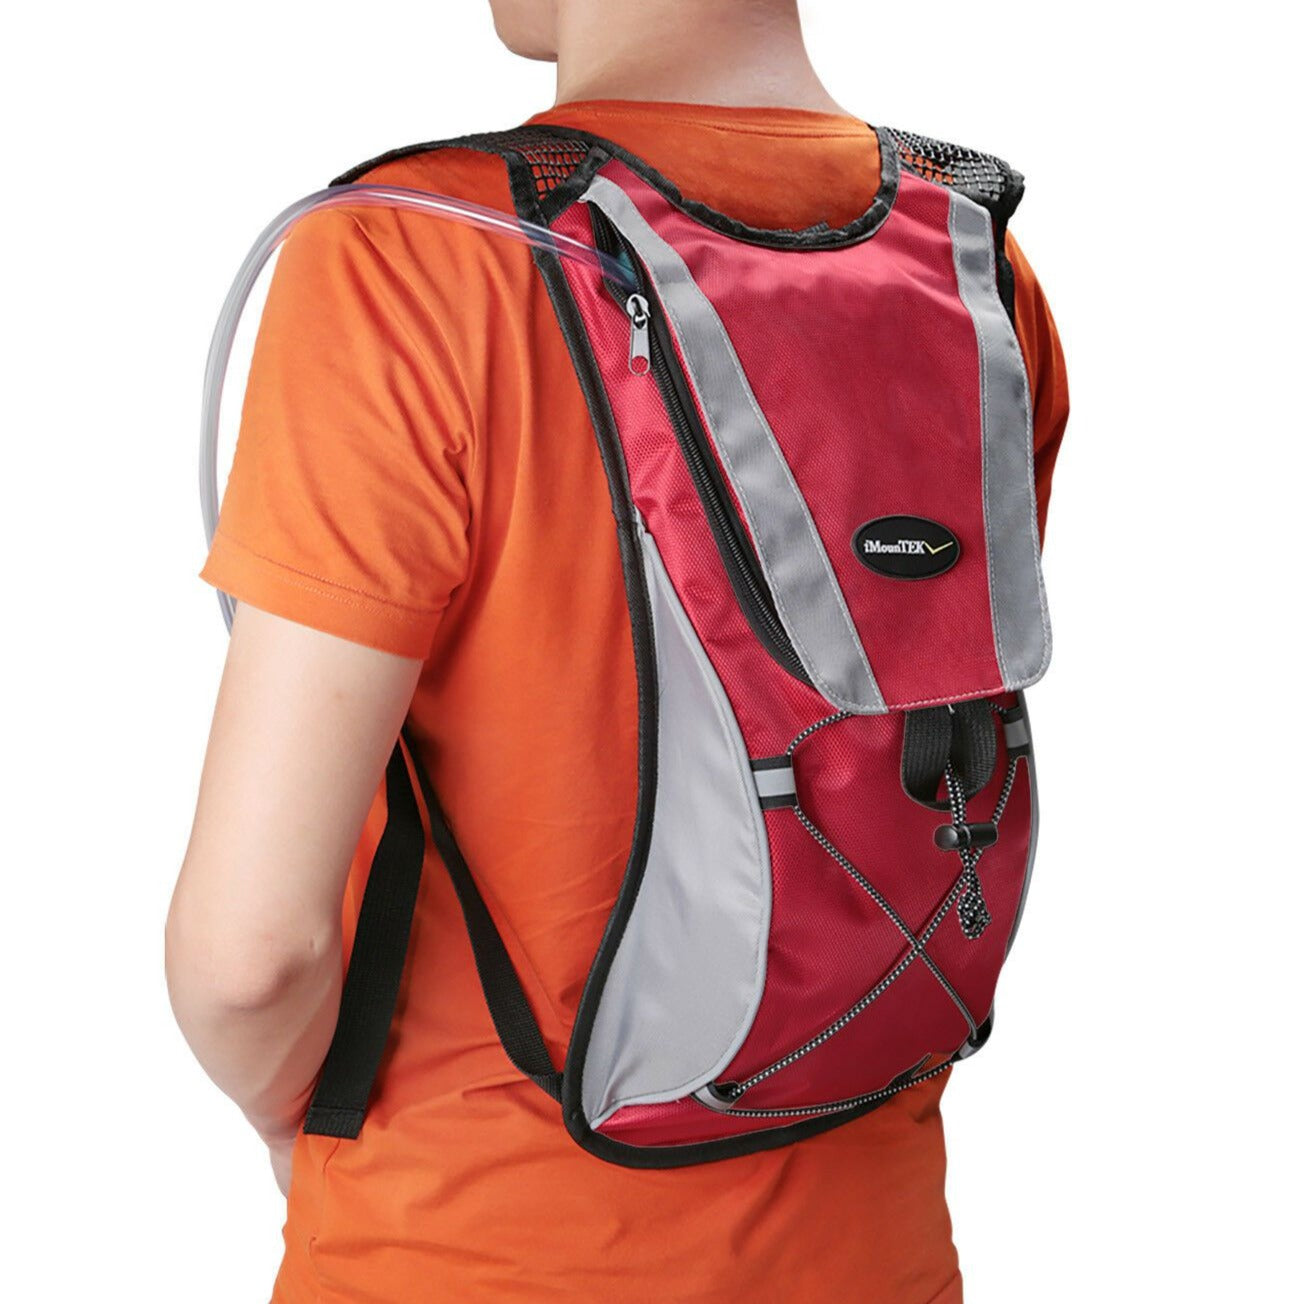 Large Capacity Hydration Water Bladder Camel Backpack 2L